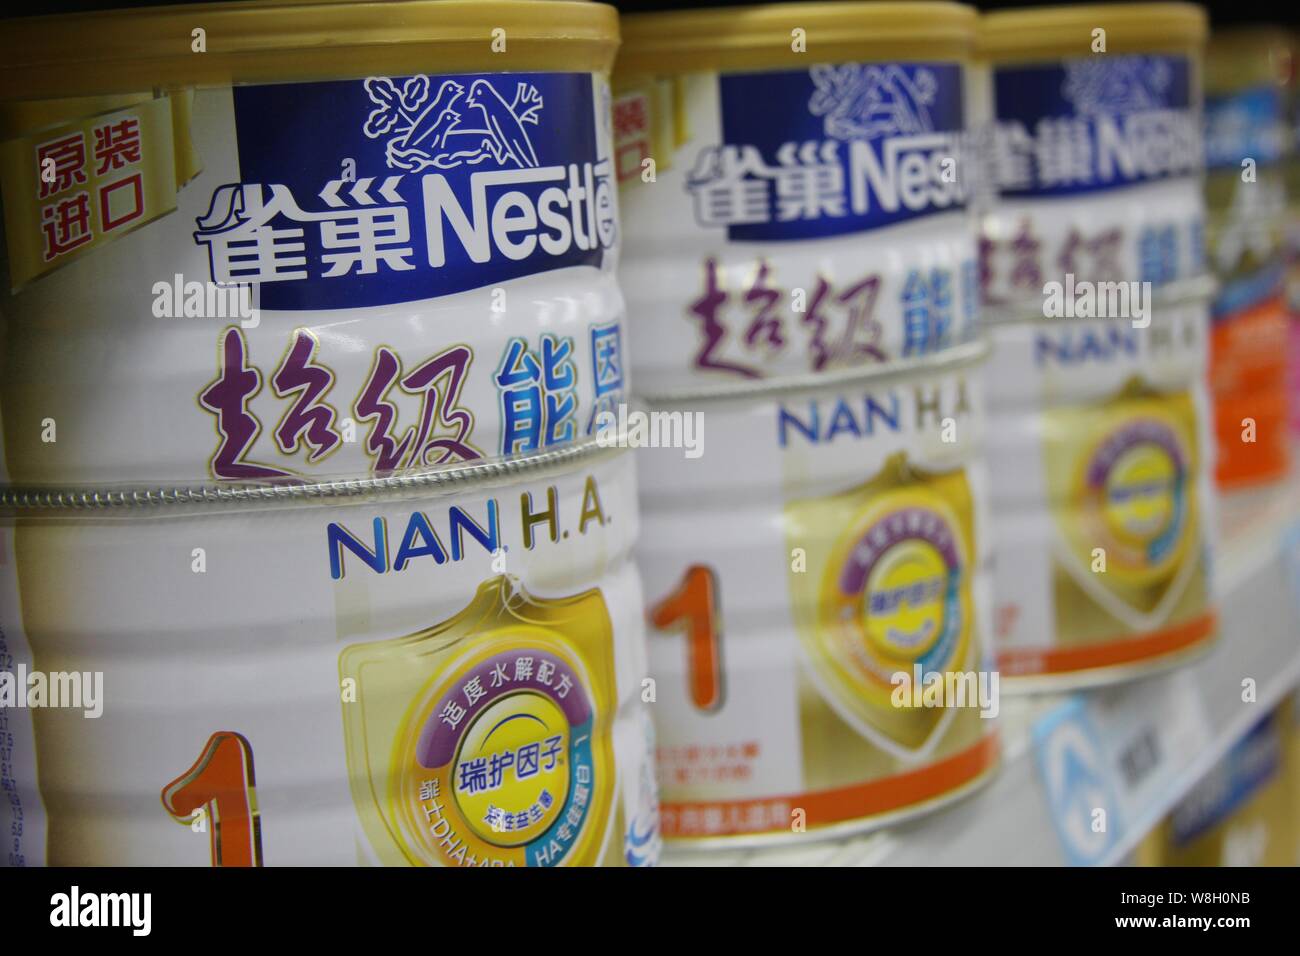 --FILE--Tins of Nestle milk powder are for sale at a supermarket in Nantong city, east China's Jiangsu province, 6 July 2013.   Swiss firm Nestle, the Stock Photo